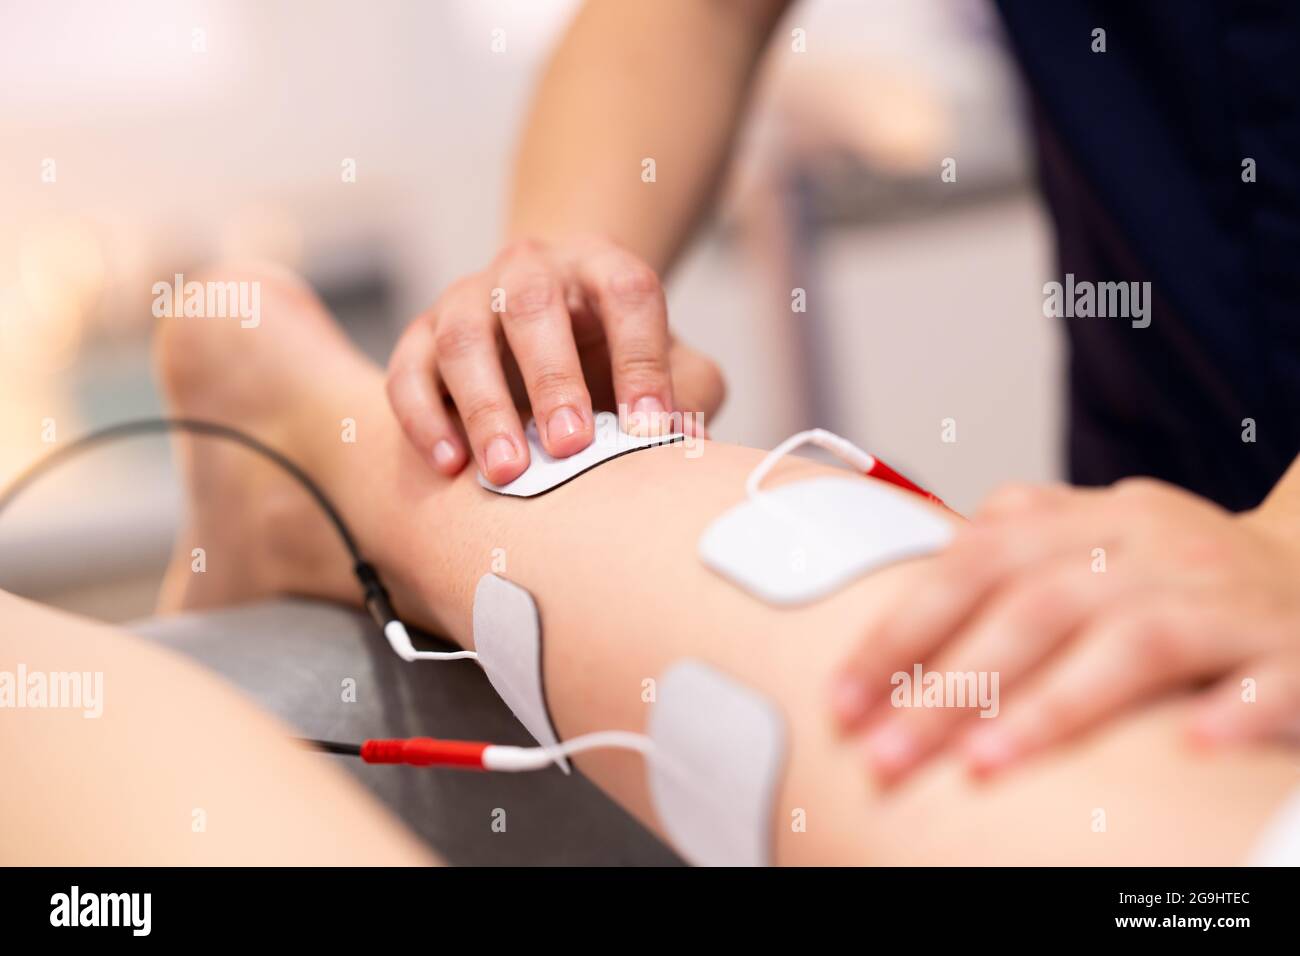 https://c8.alamy.com/comp/2G9HTEC/electro-stimulation-in-physical-therapy-to-a-young-woman-2G9HTEC.jpg